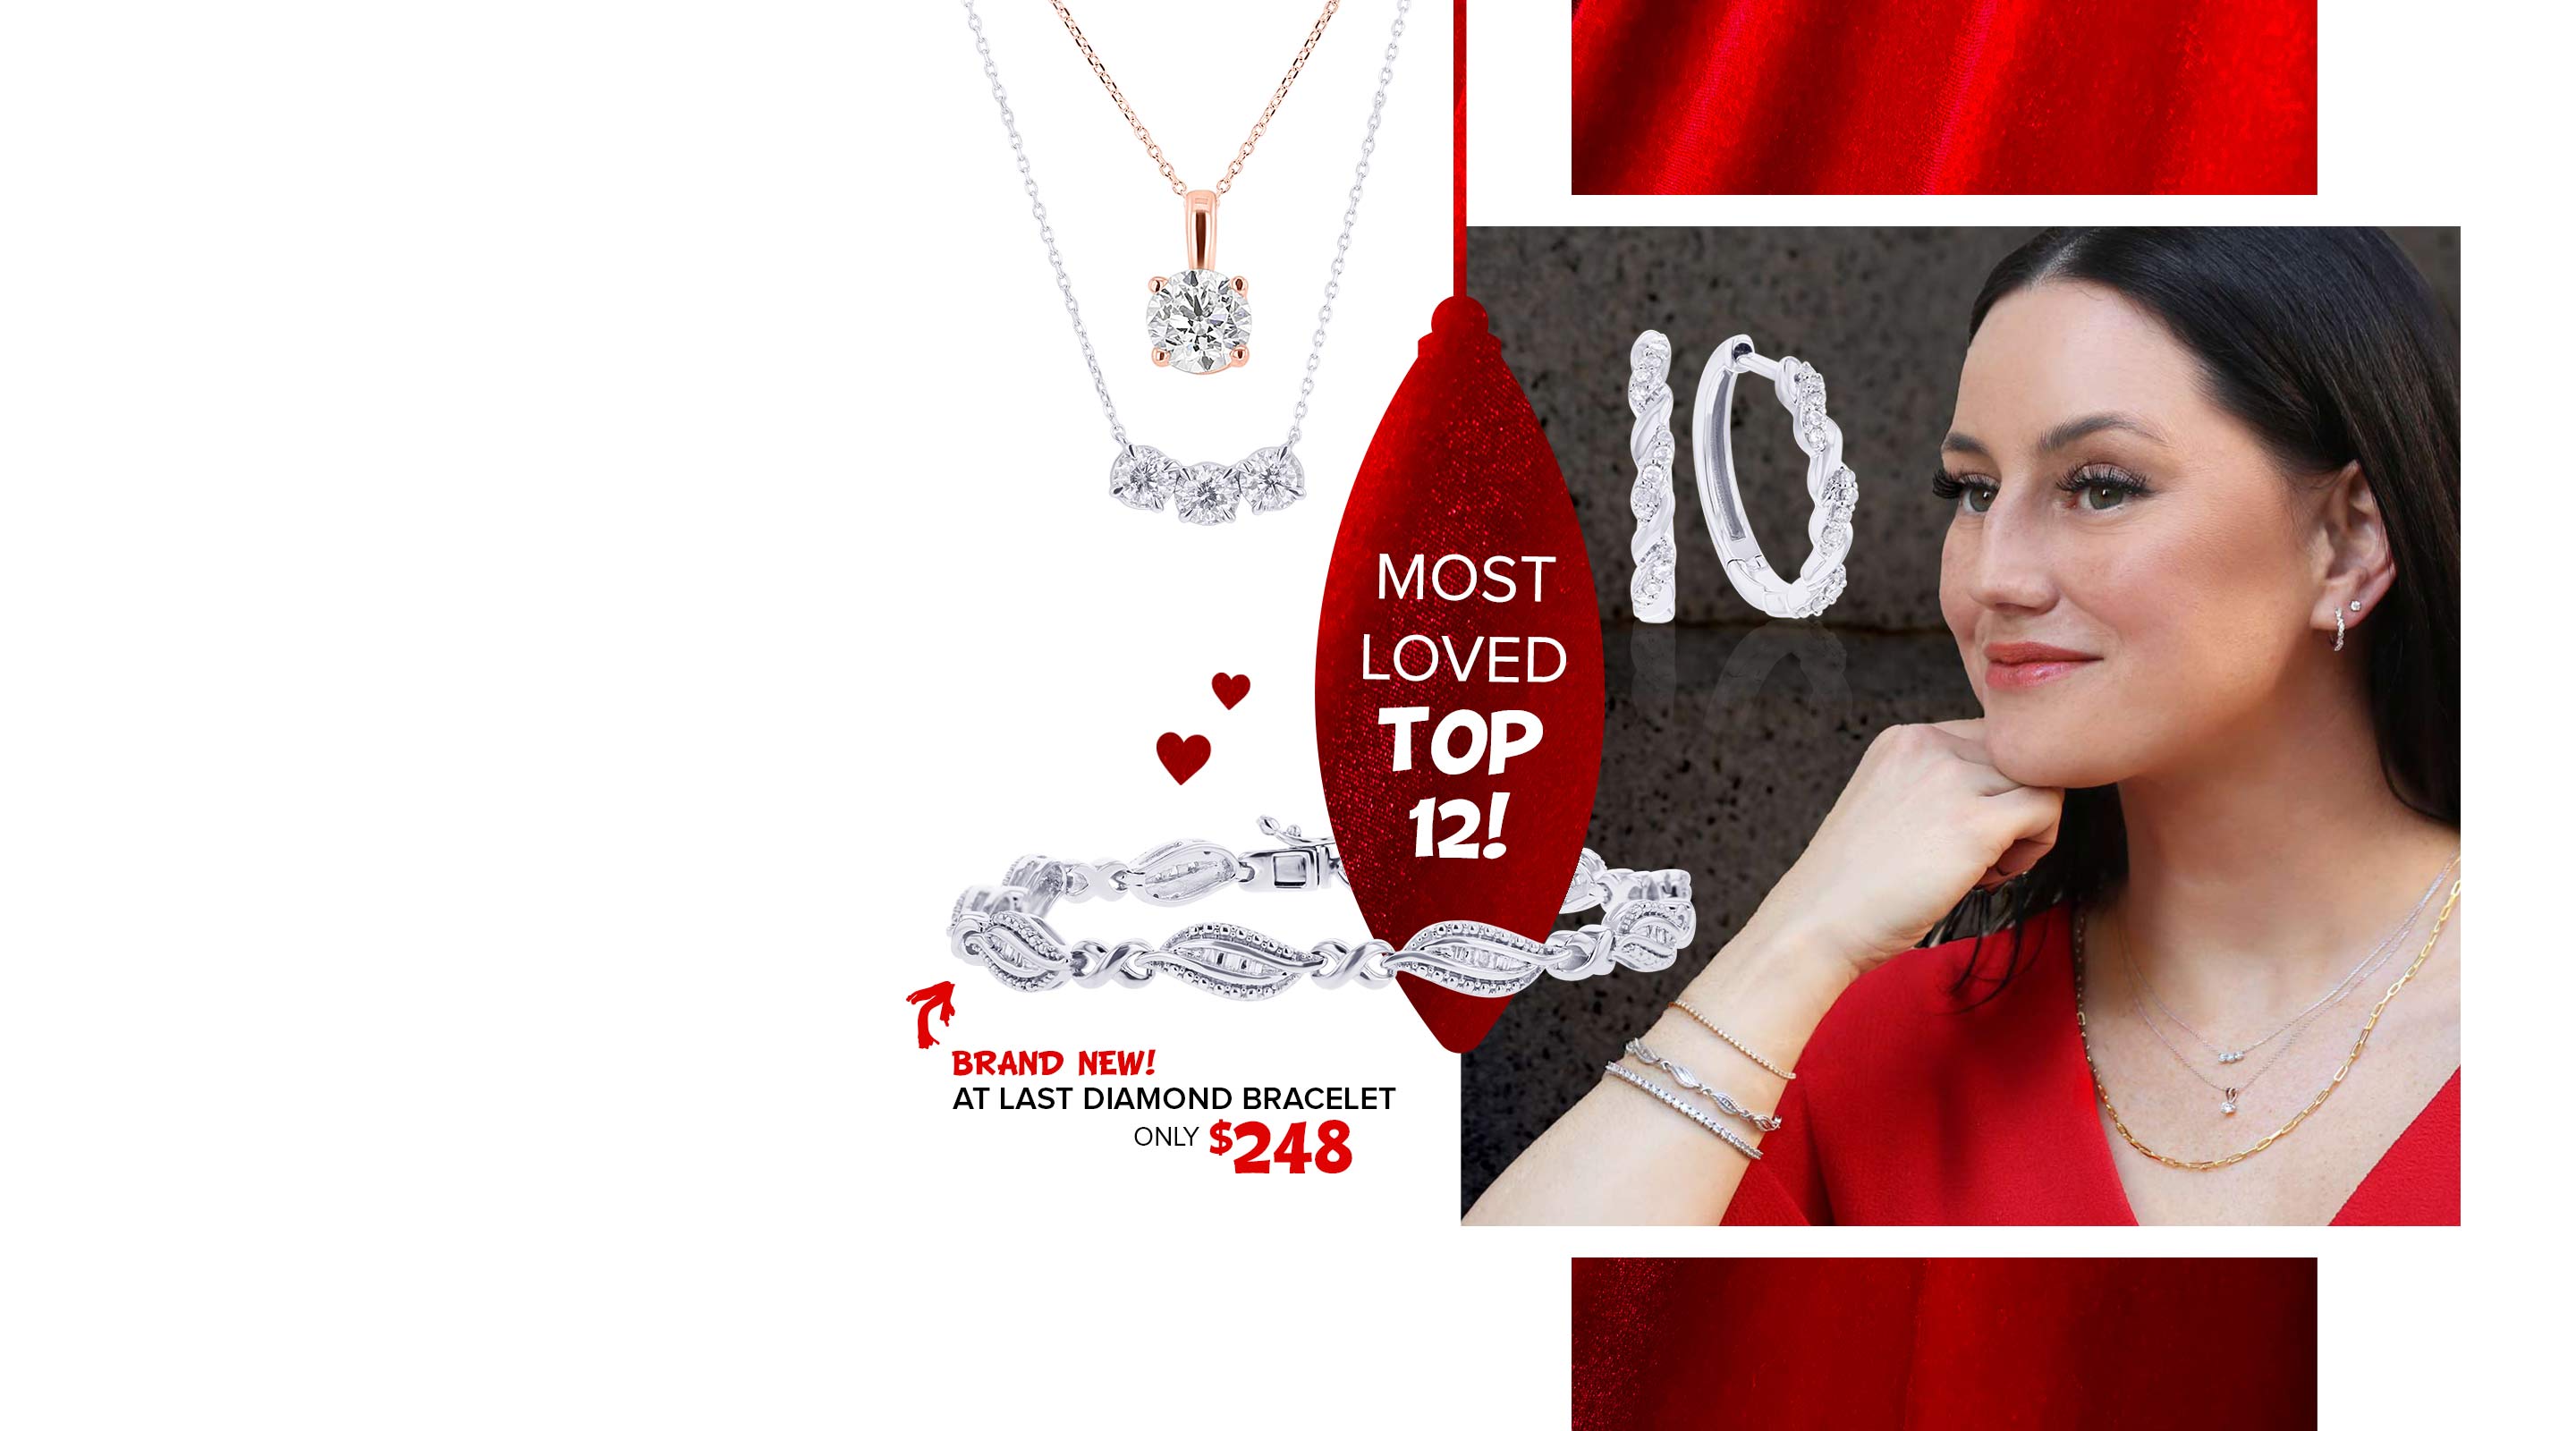 Our most loved top 12 diamond gifts for holiday featuring bracelets, necklaces, earrings and more.